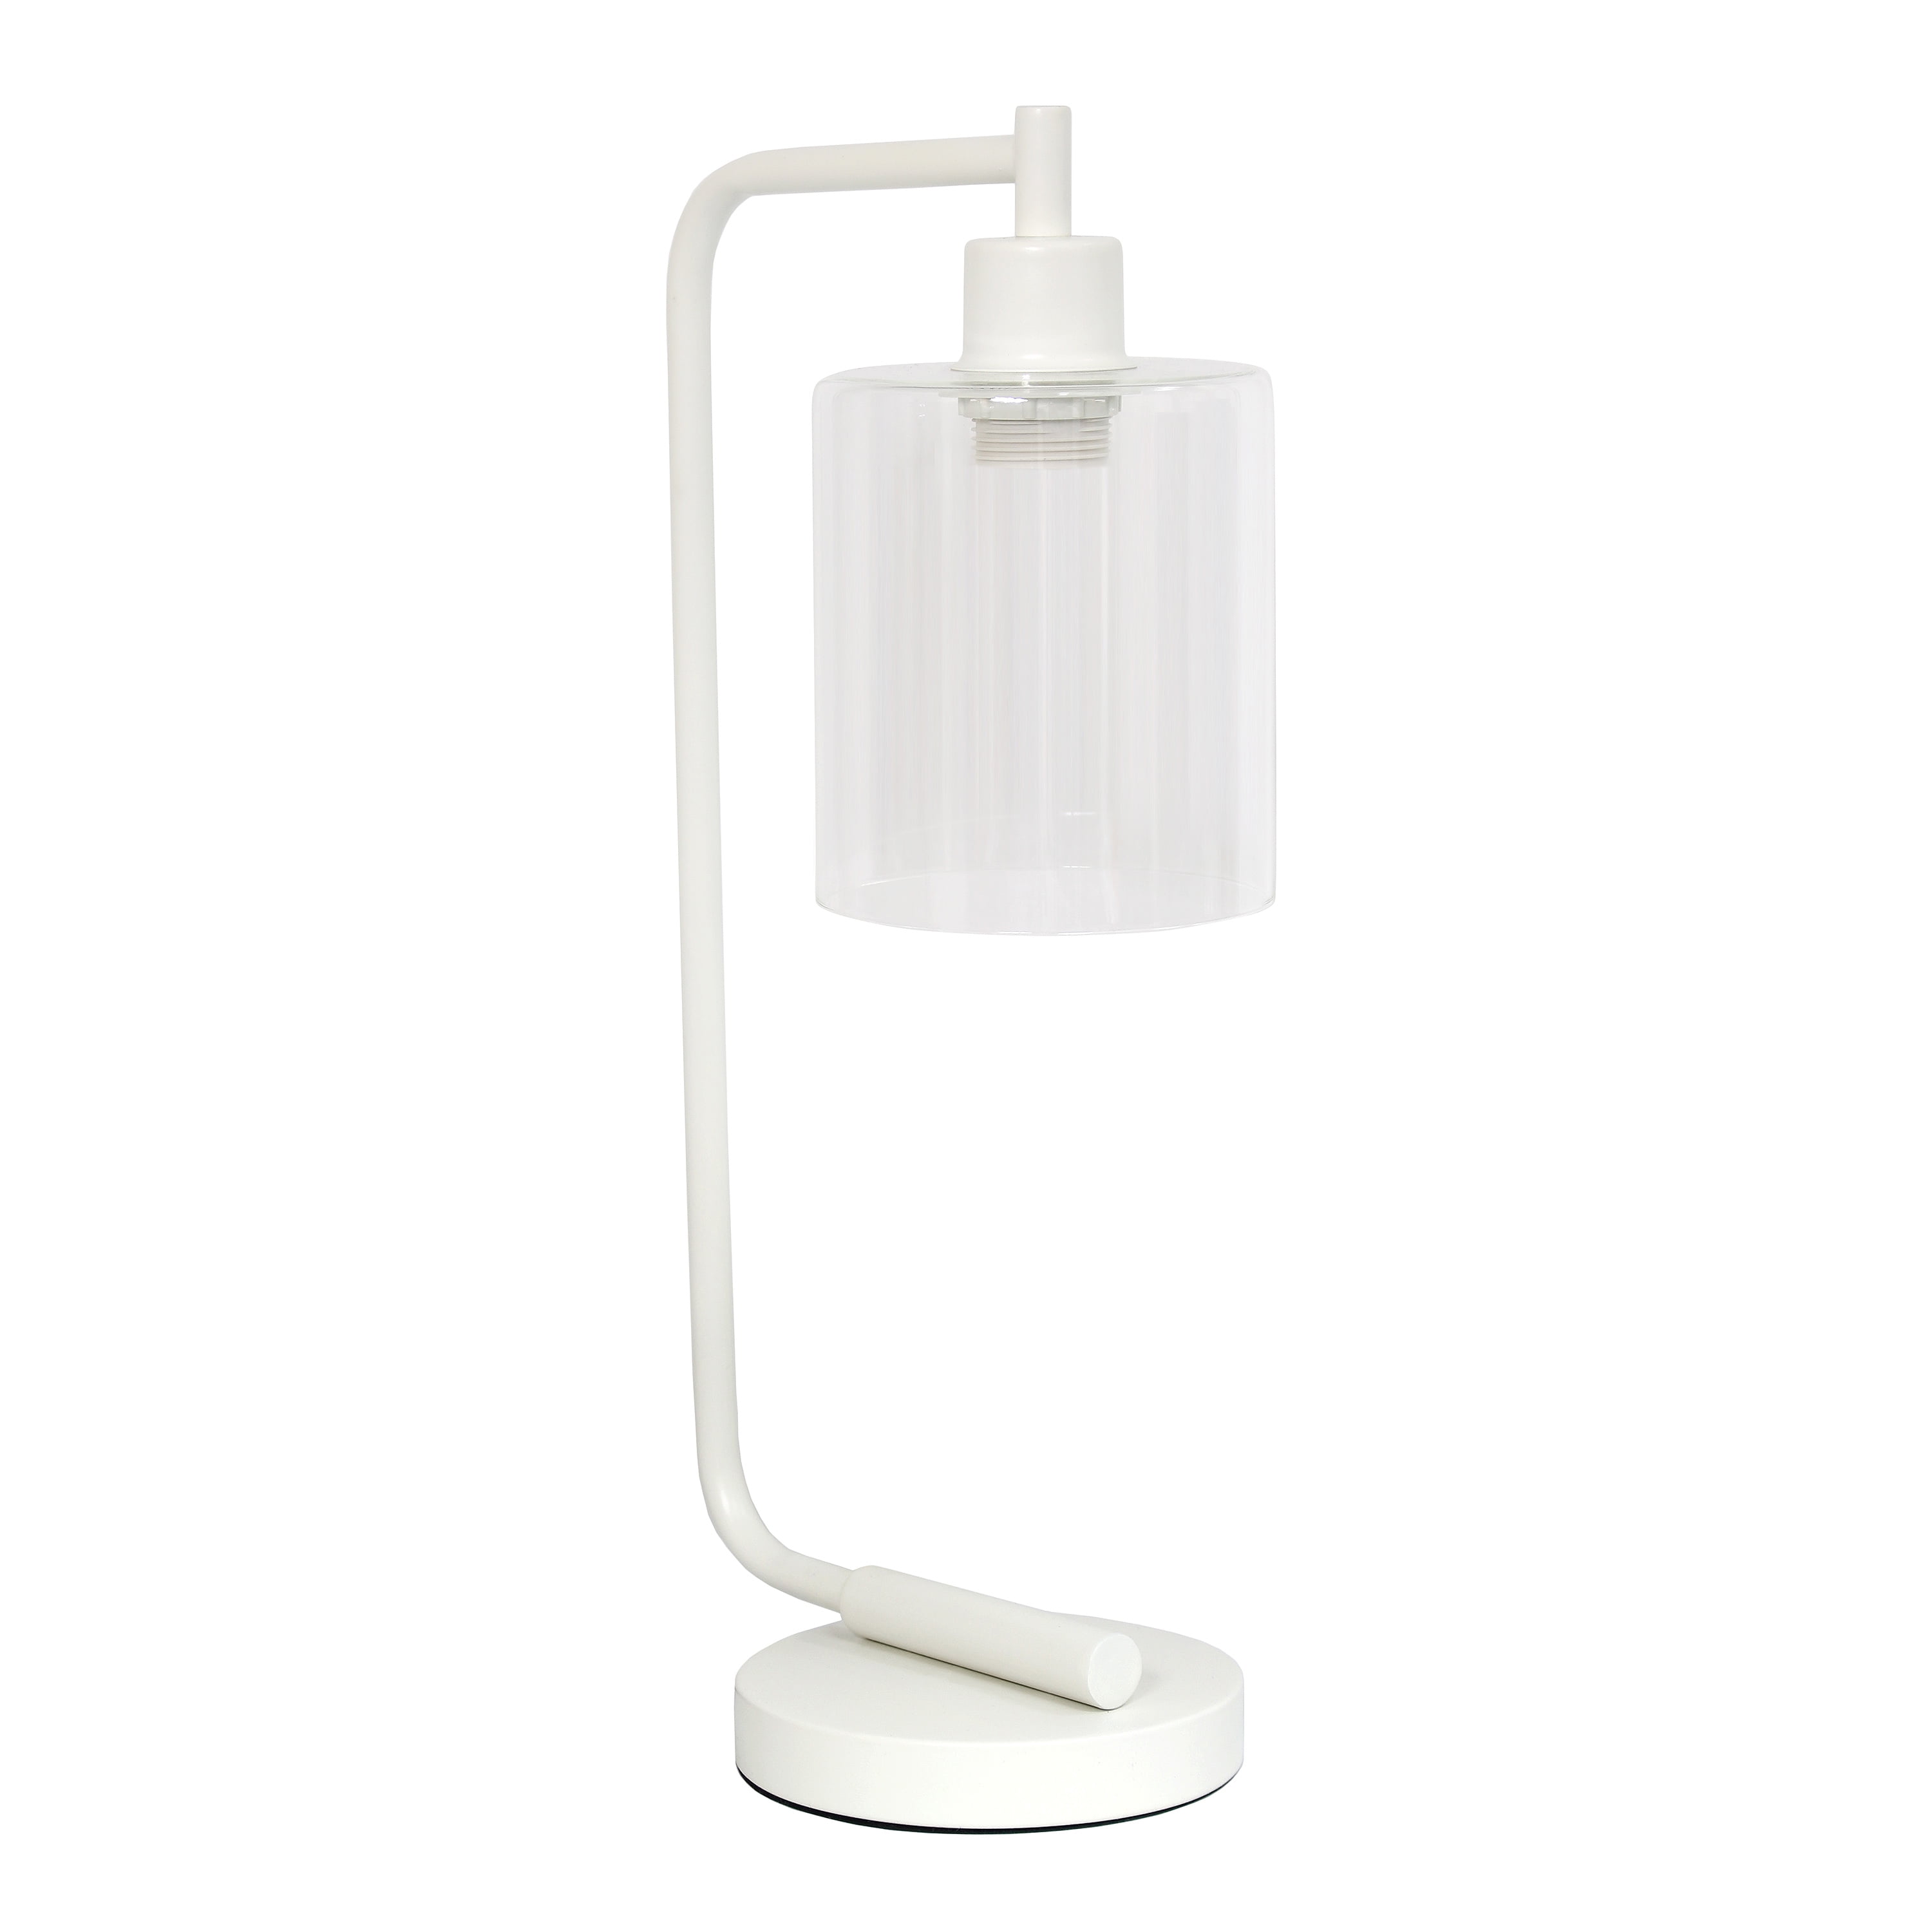 Ld1036-wht 18.75 In. Bronson Antique Style Industrial Iron Lantern Desk Lamp With Glass Shade, White